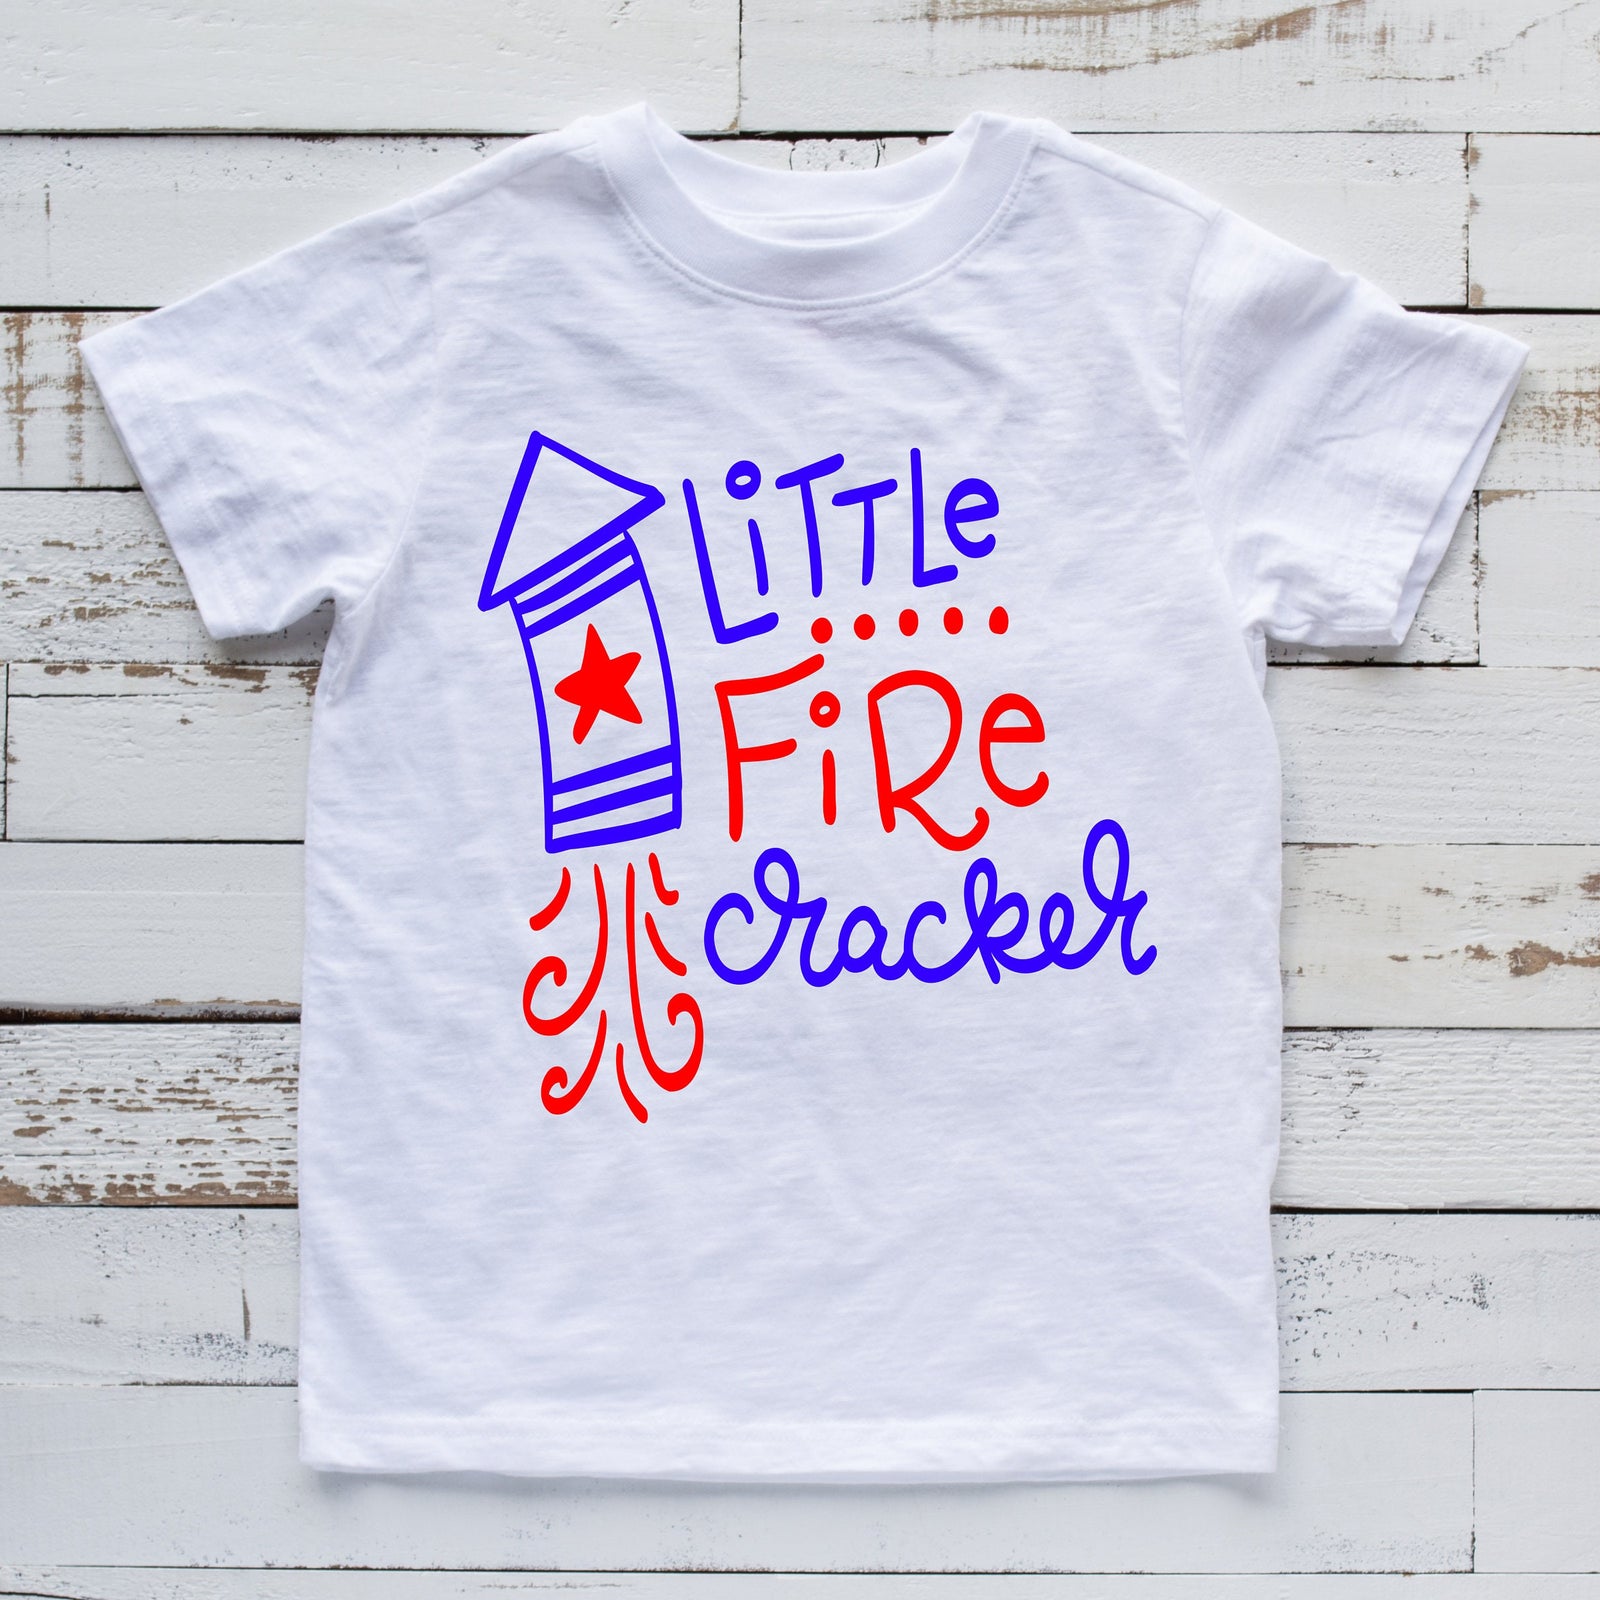 Little Fire Cracker - Youth Fourth Of July Shirt - Memorial Day - Red White and Blue